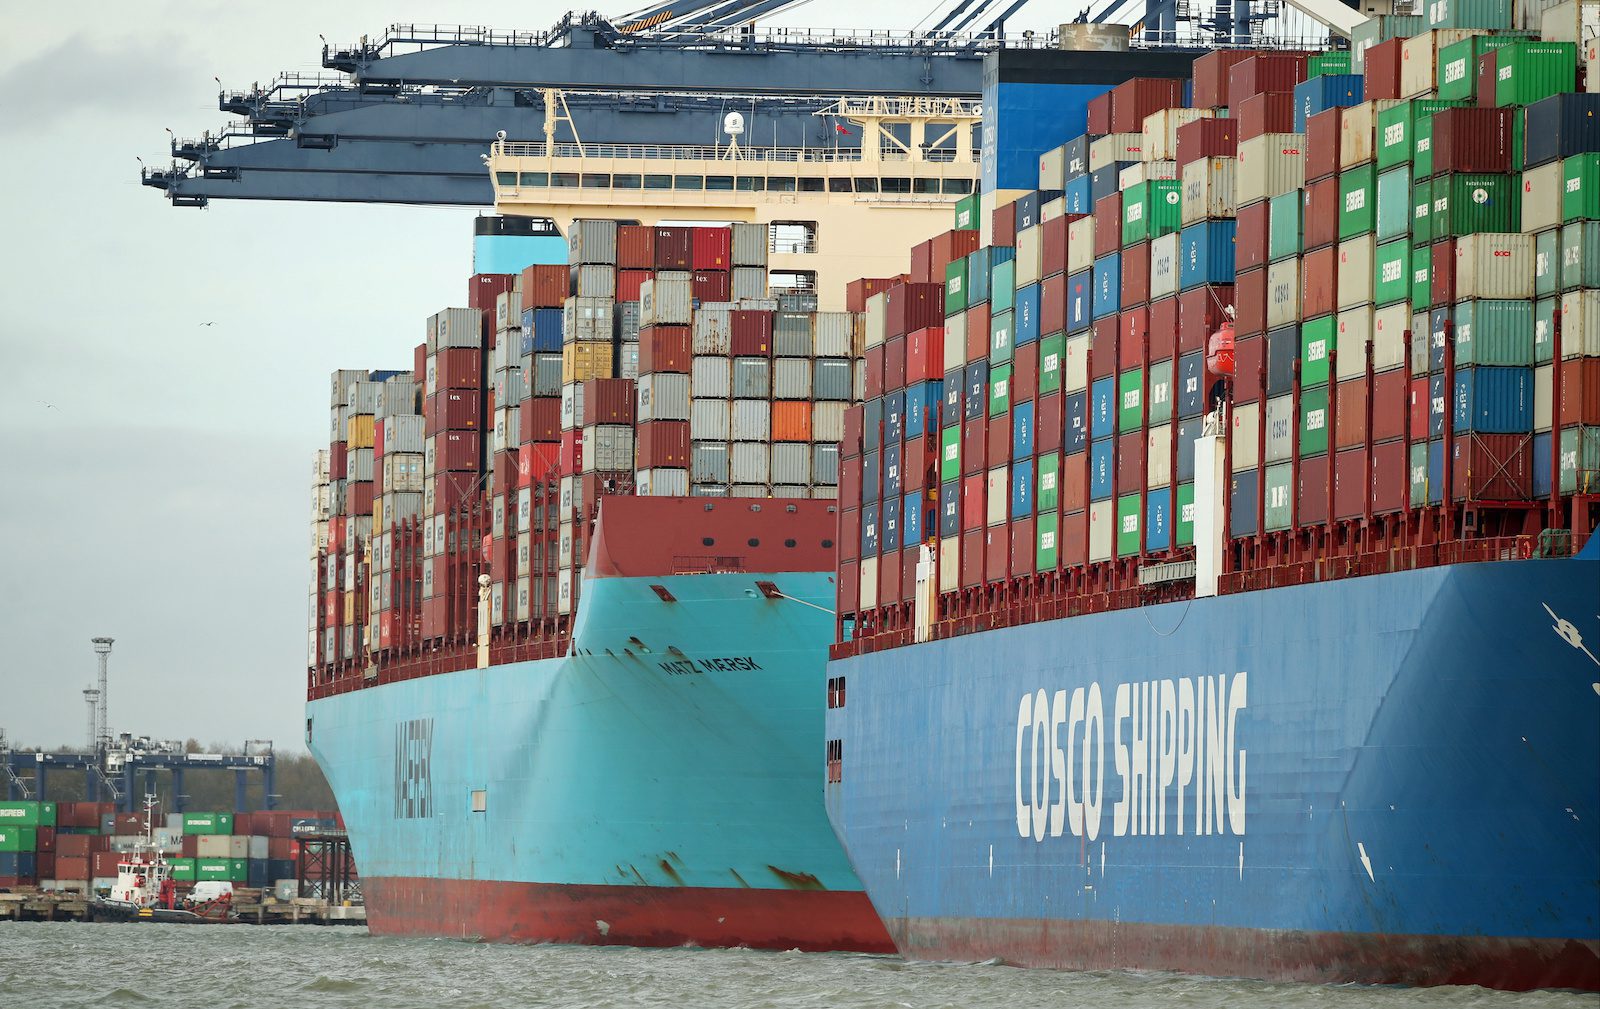 No Happy New Year for Shippers as Rates Stay Sky High